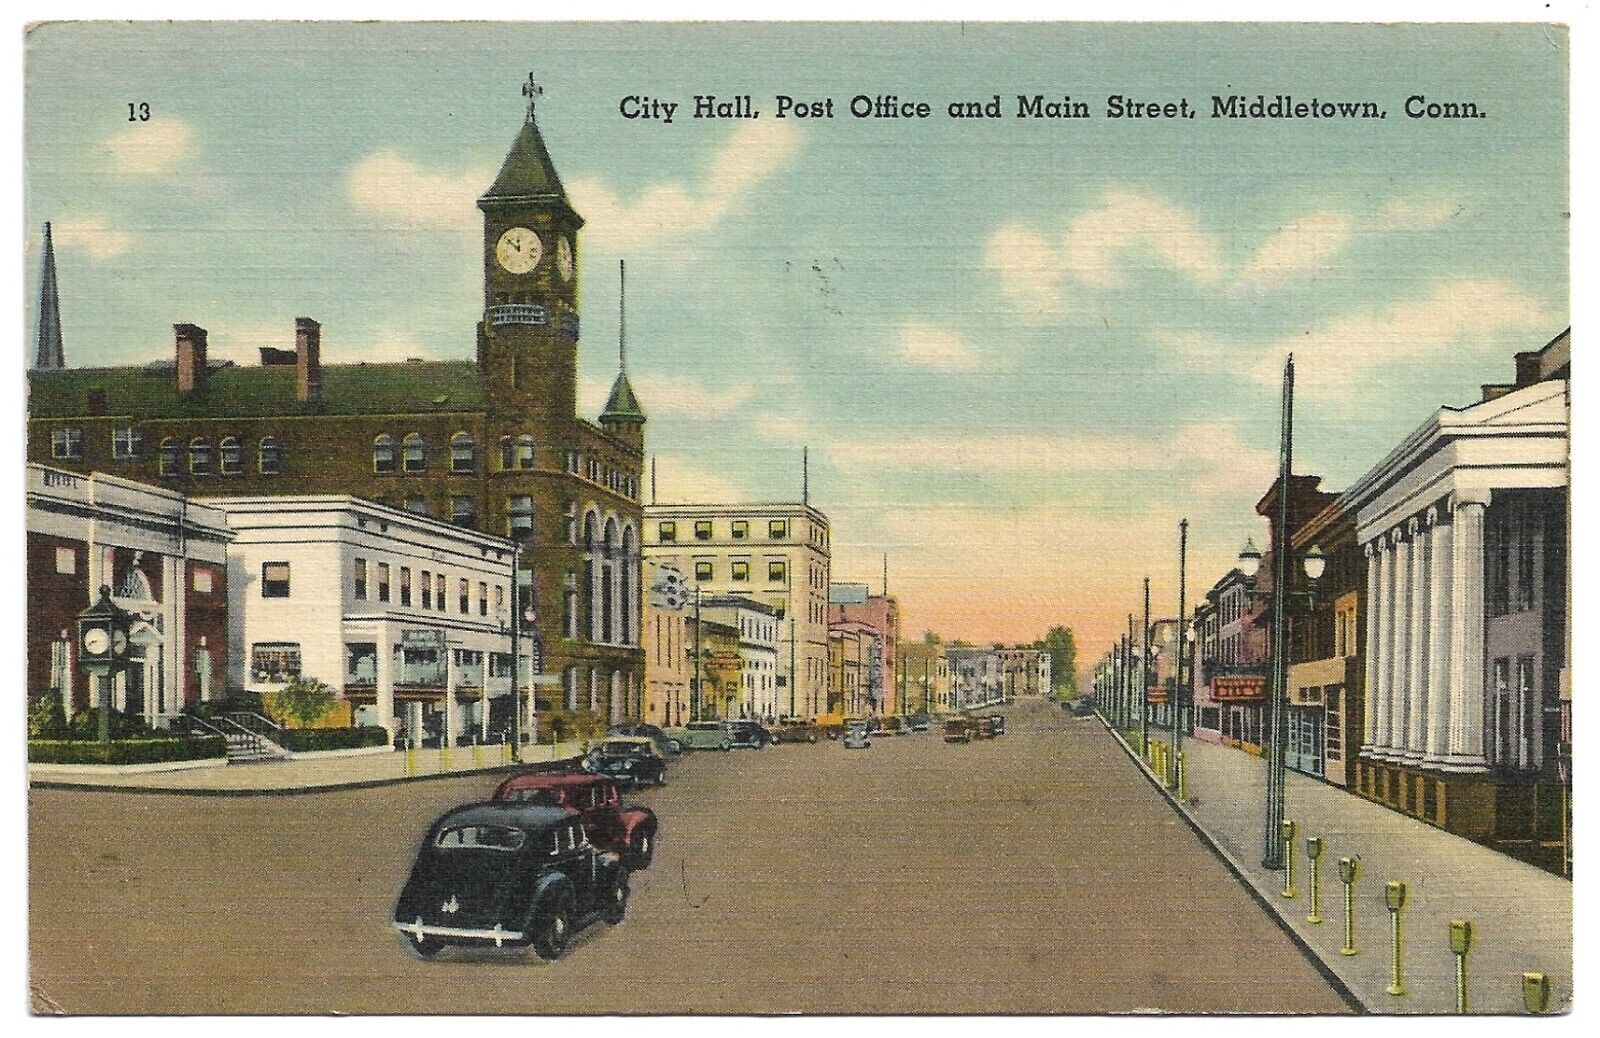 Middletown CT Main Street View City Hall Post Office Classic Car 1945 Postcard